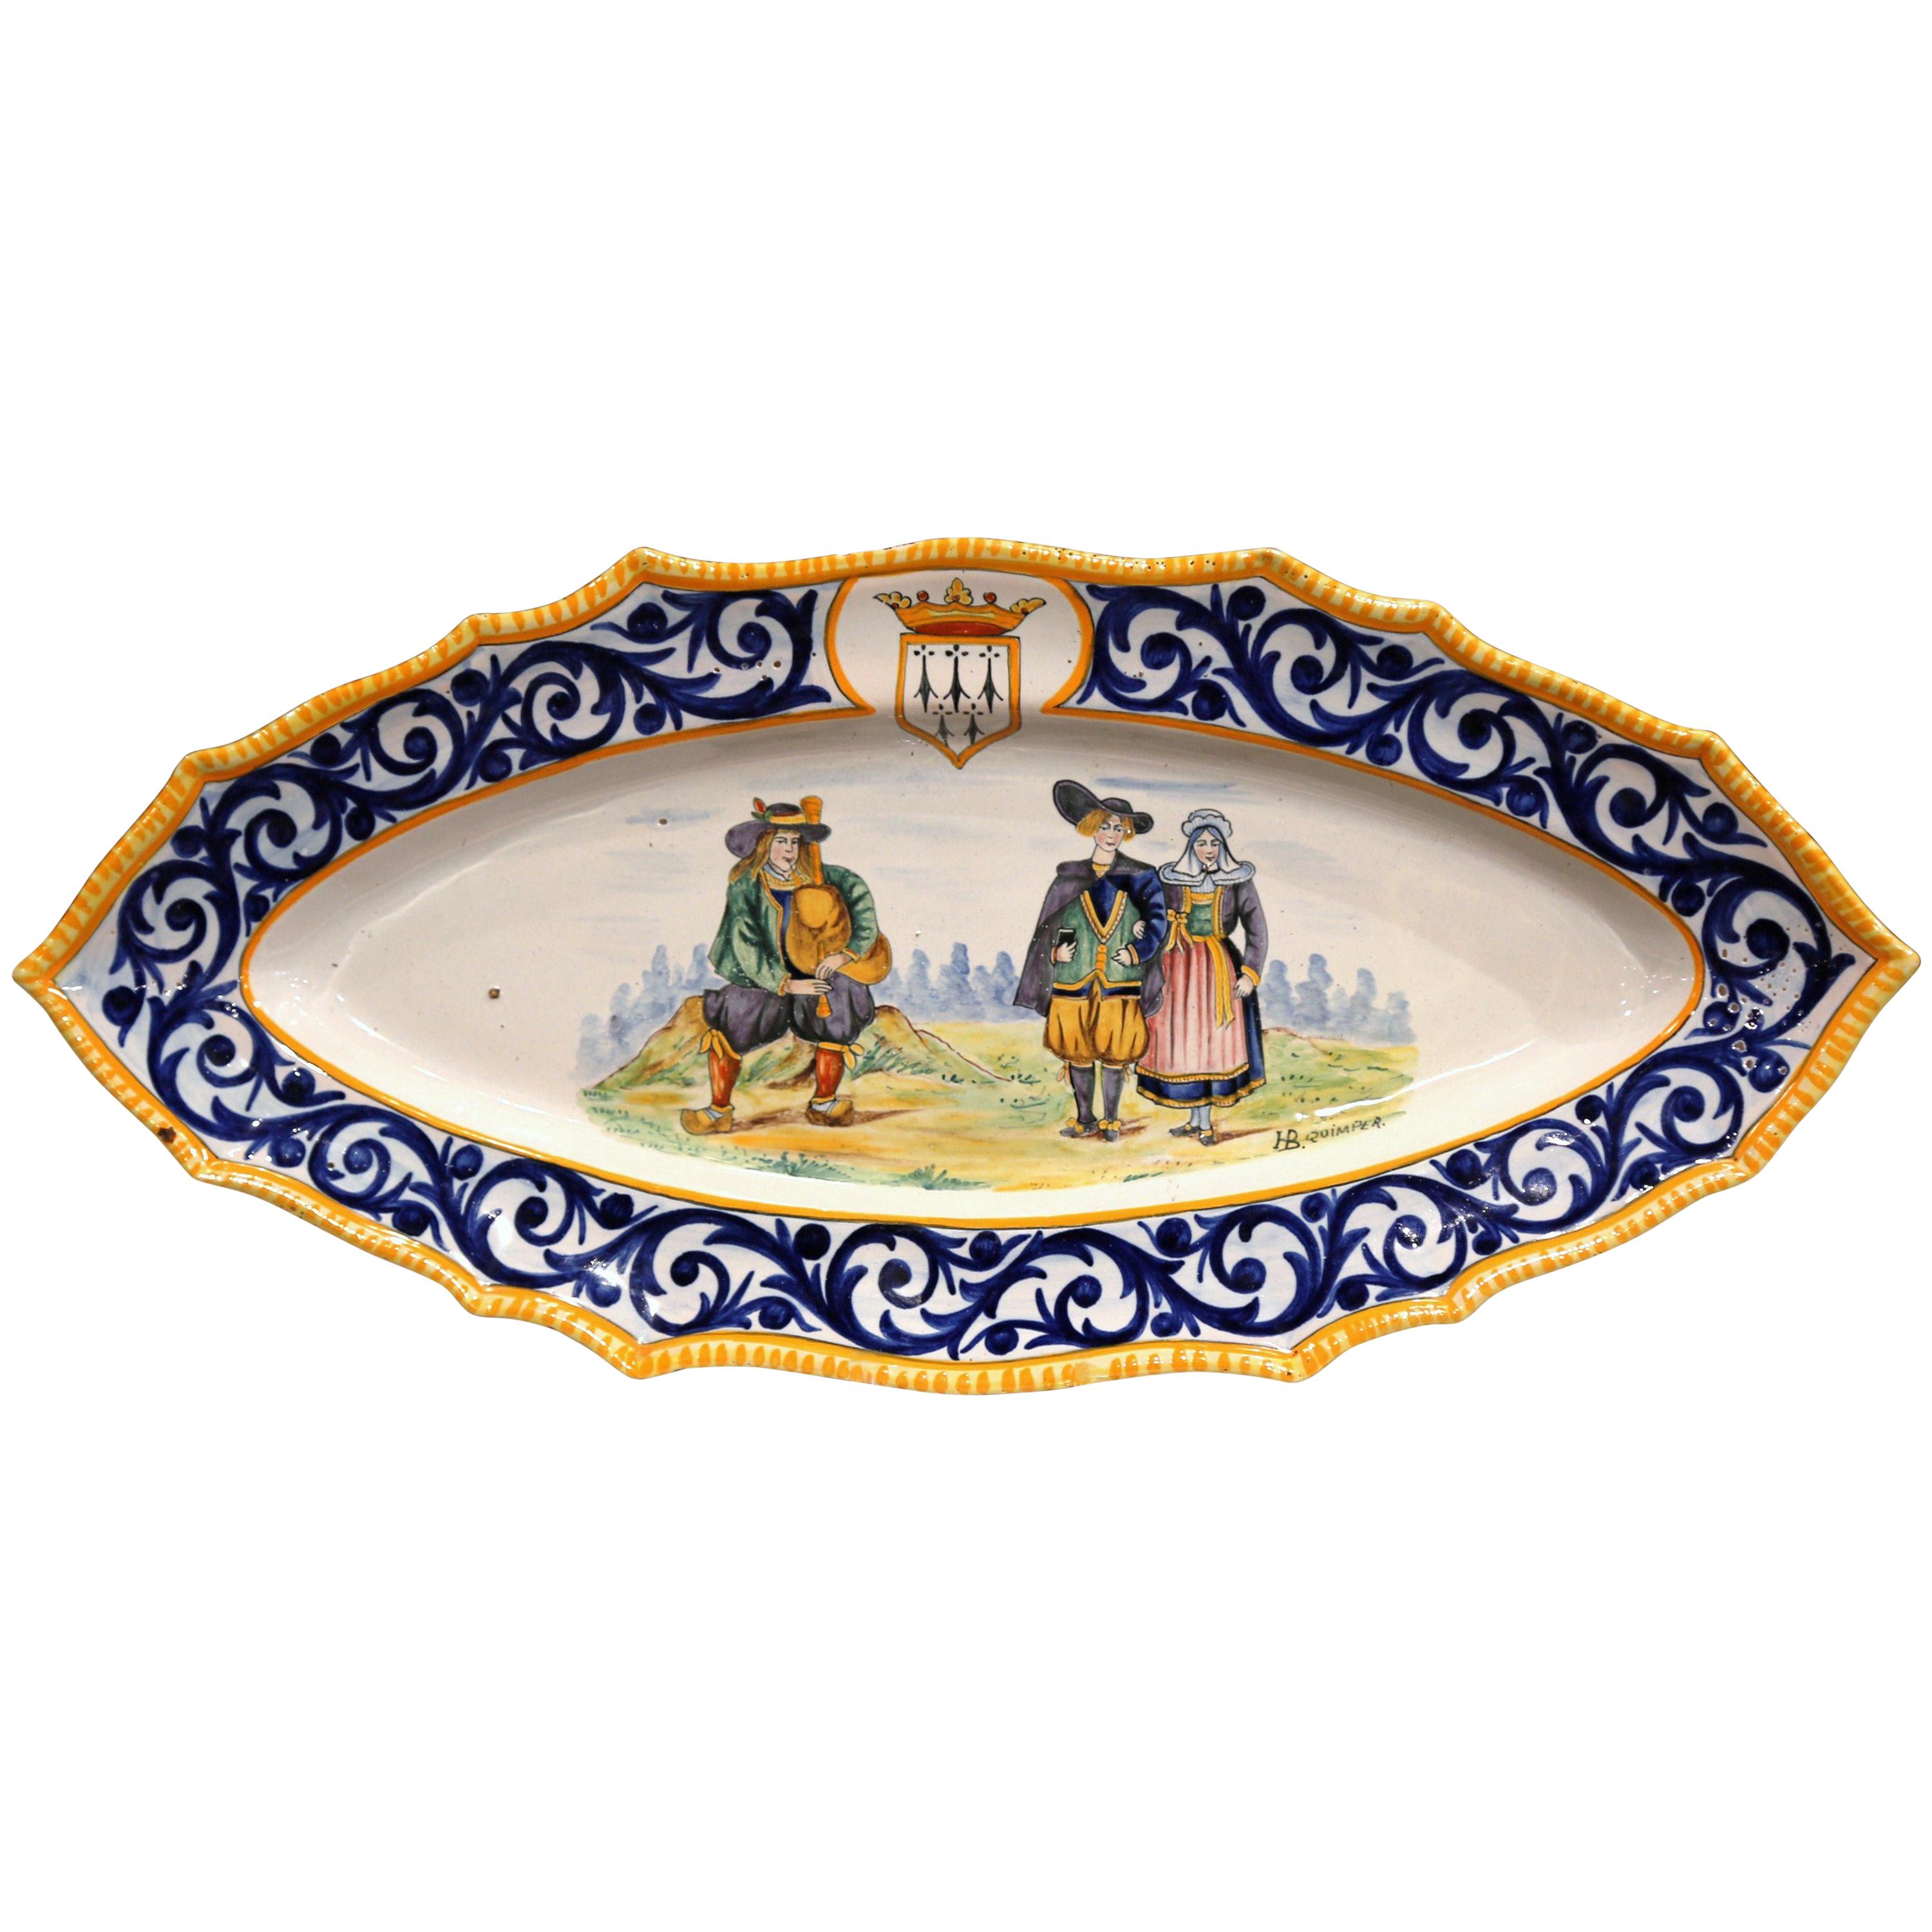  Mid-20th Century French Hand-Painted Oval Faience HB Quimper Decorative Platter